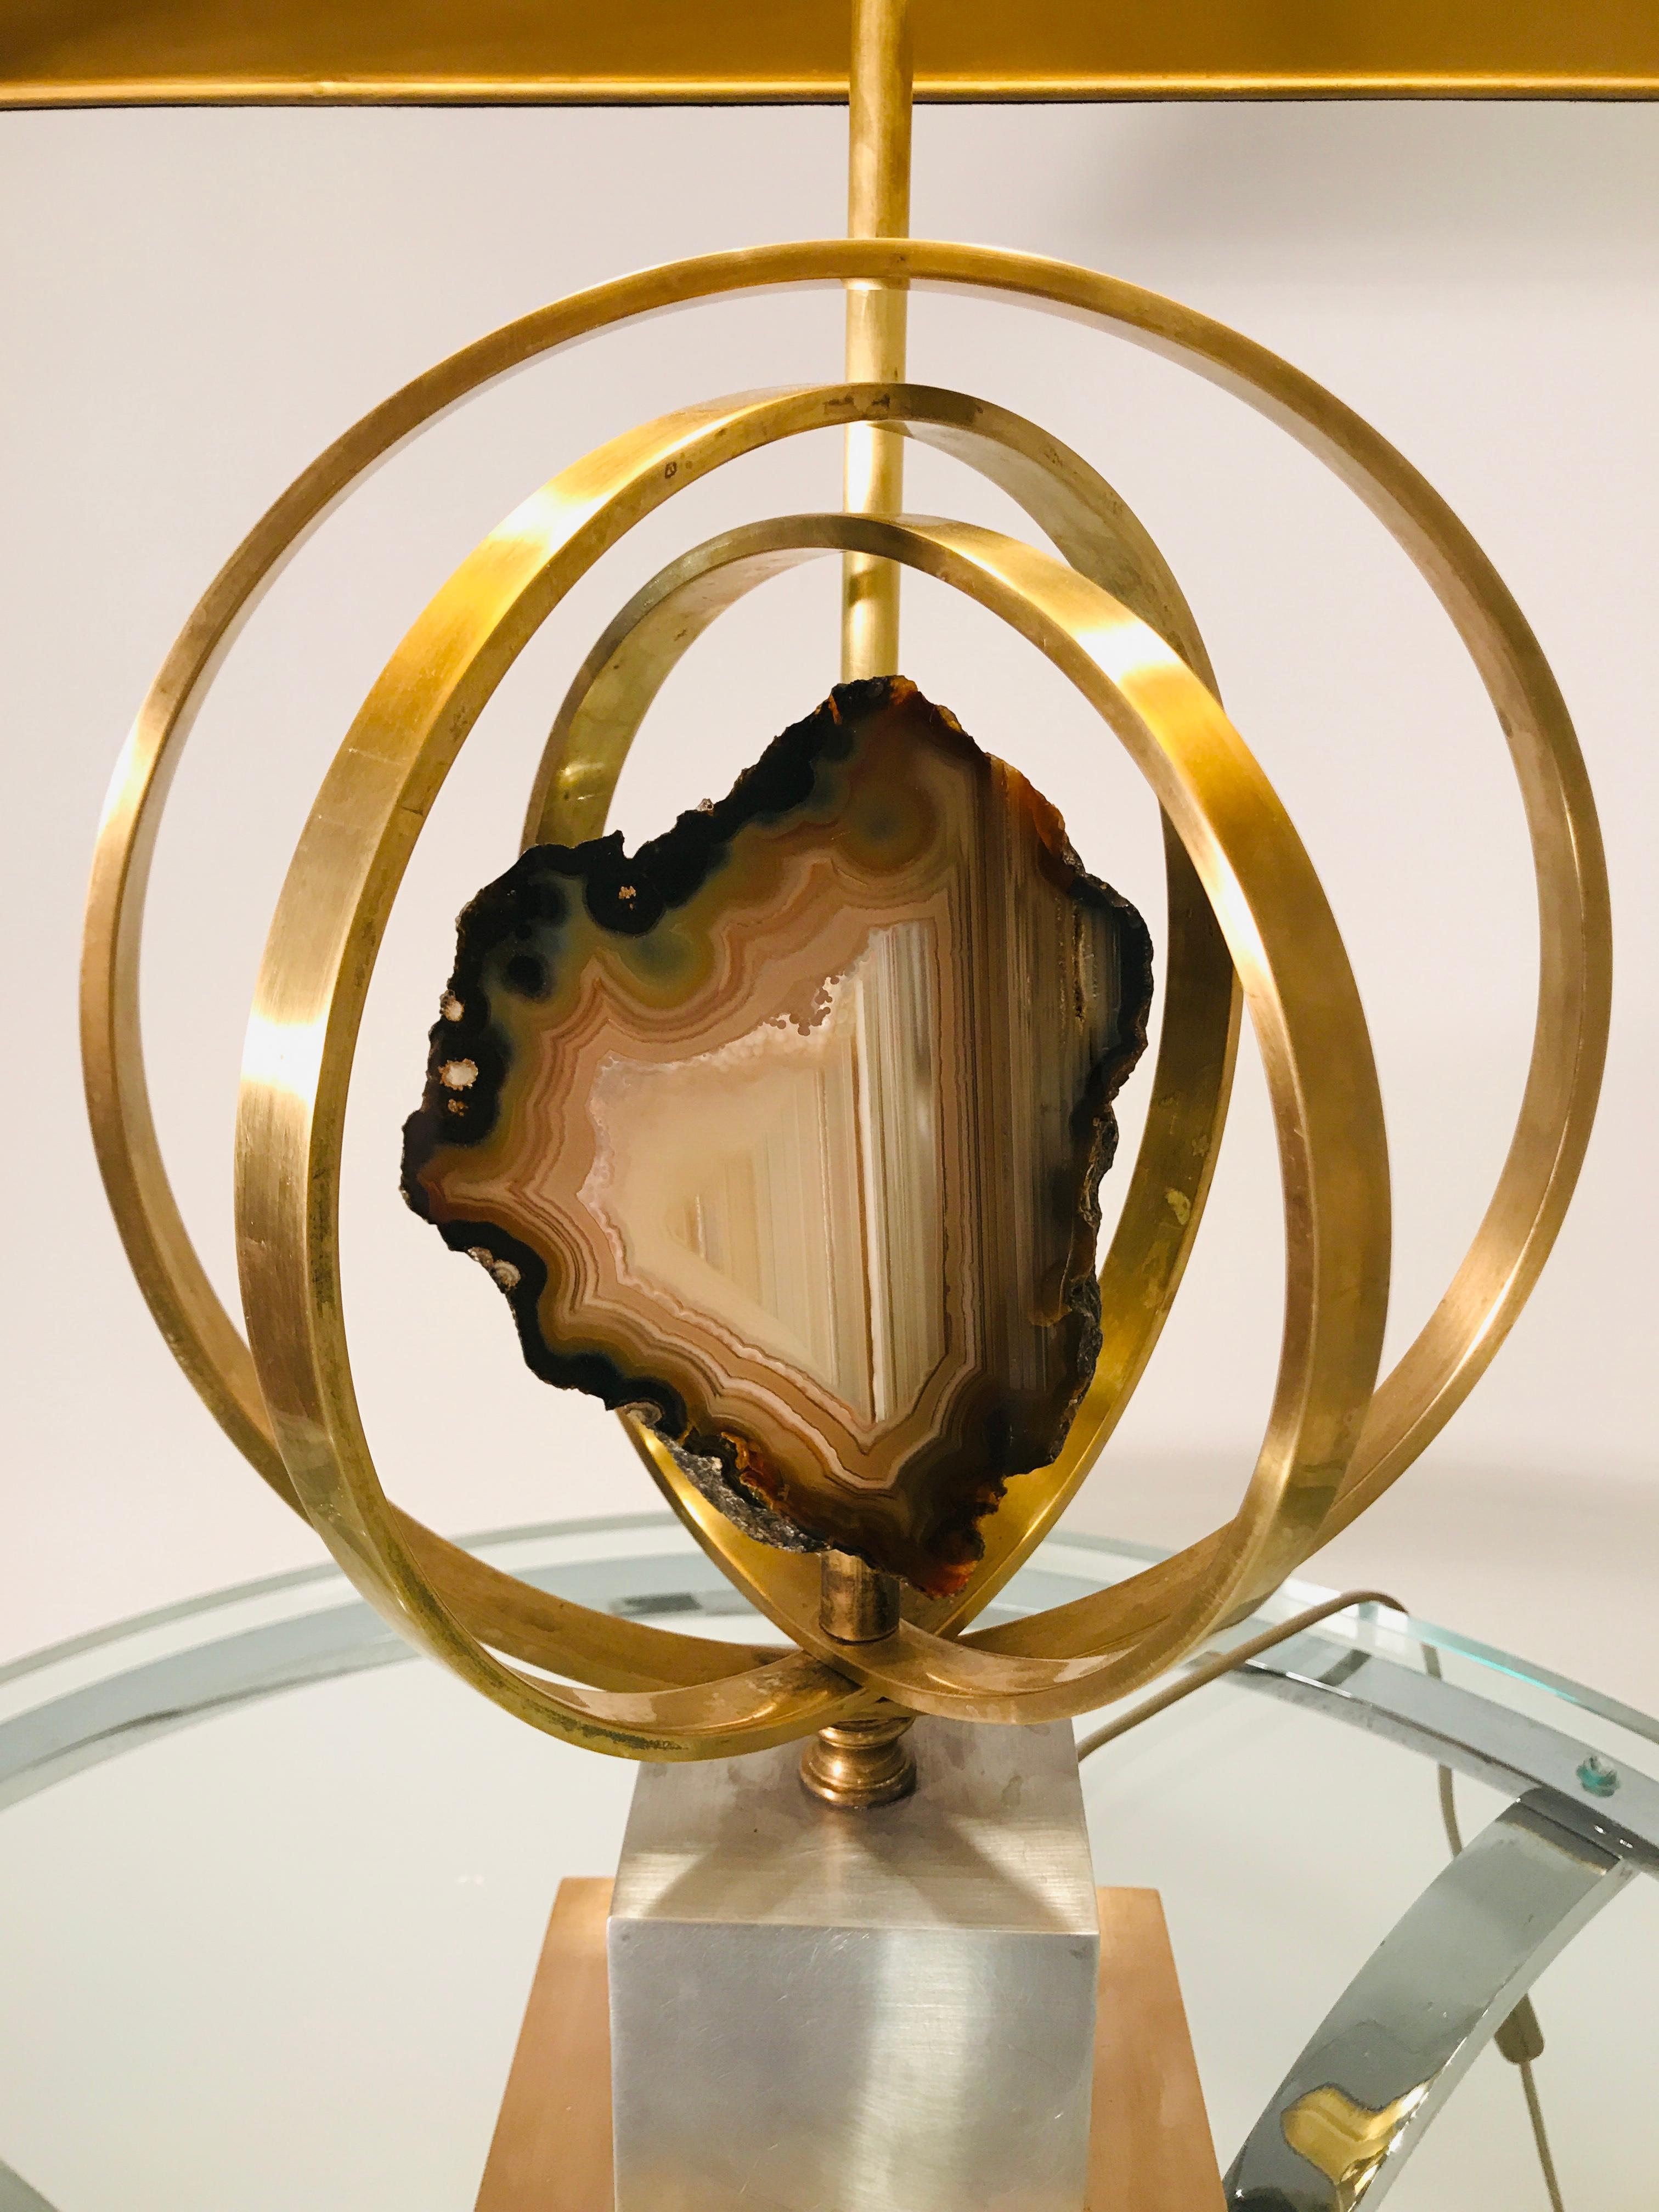 From the 1970s comes this table lamp in cercle brass and gemstone agate. The lamp received new electric al wires according to the latest safety standards. Signed by the artist.
Dimensions: 42cm x 28cm x 70cm H.
without shade: 25cm x 25cm x 70cm H.